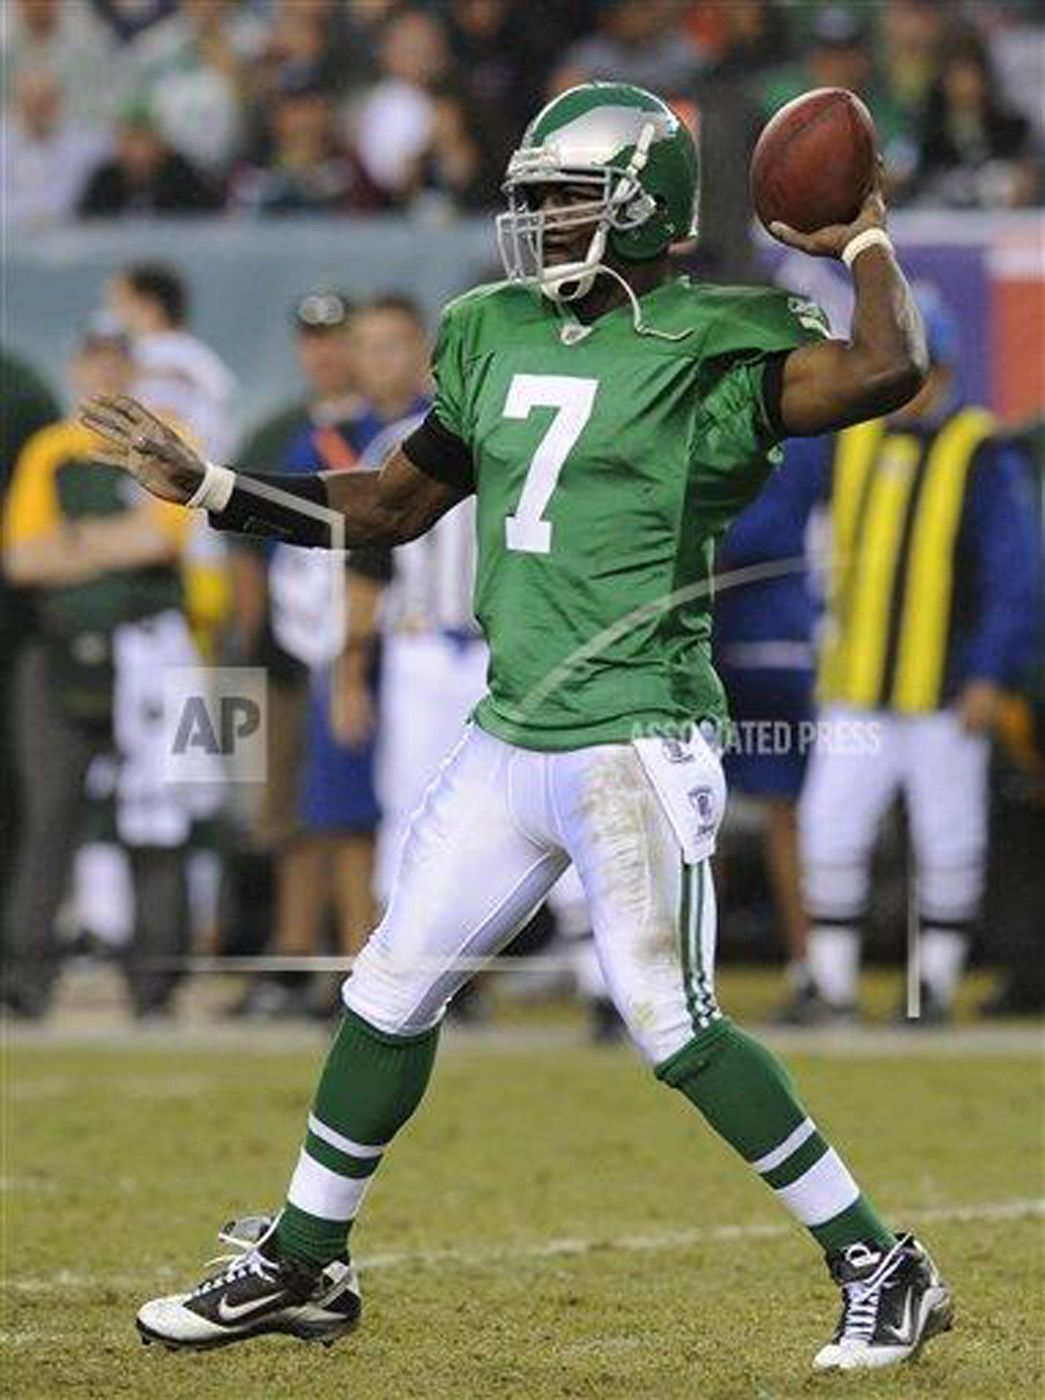 kelly green mike vick jersey